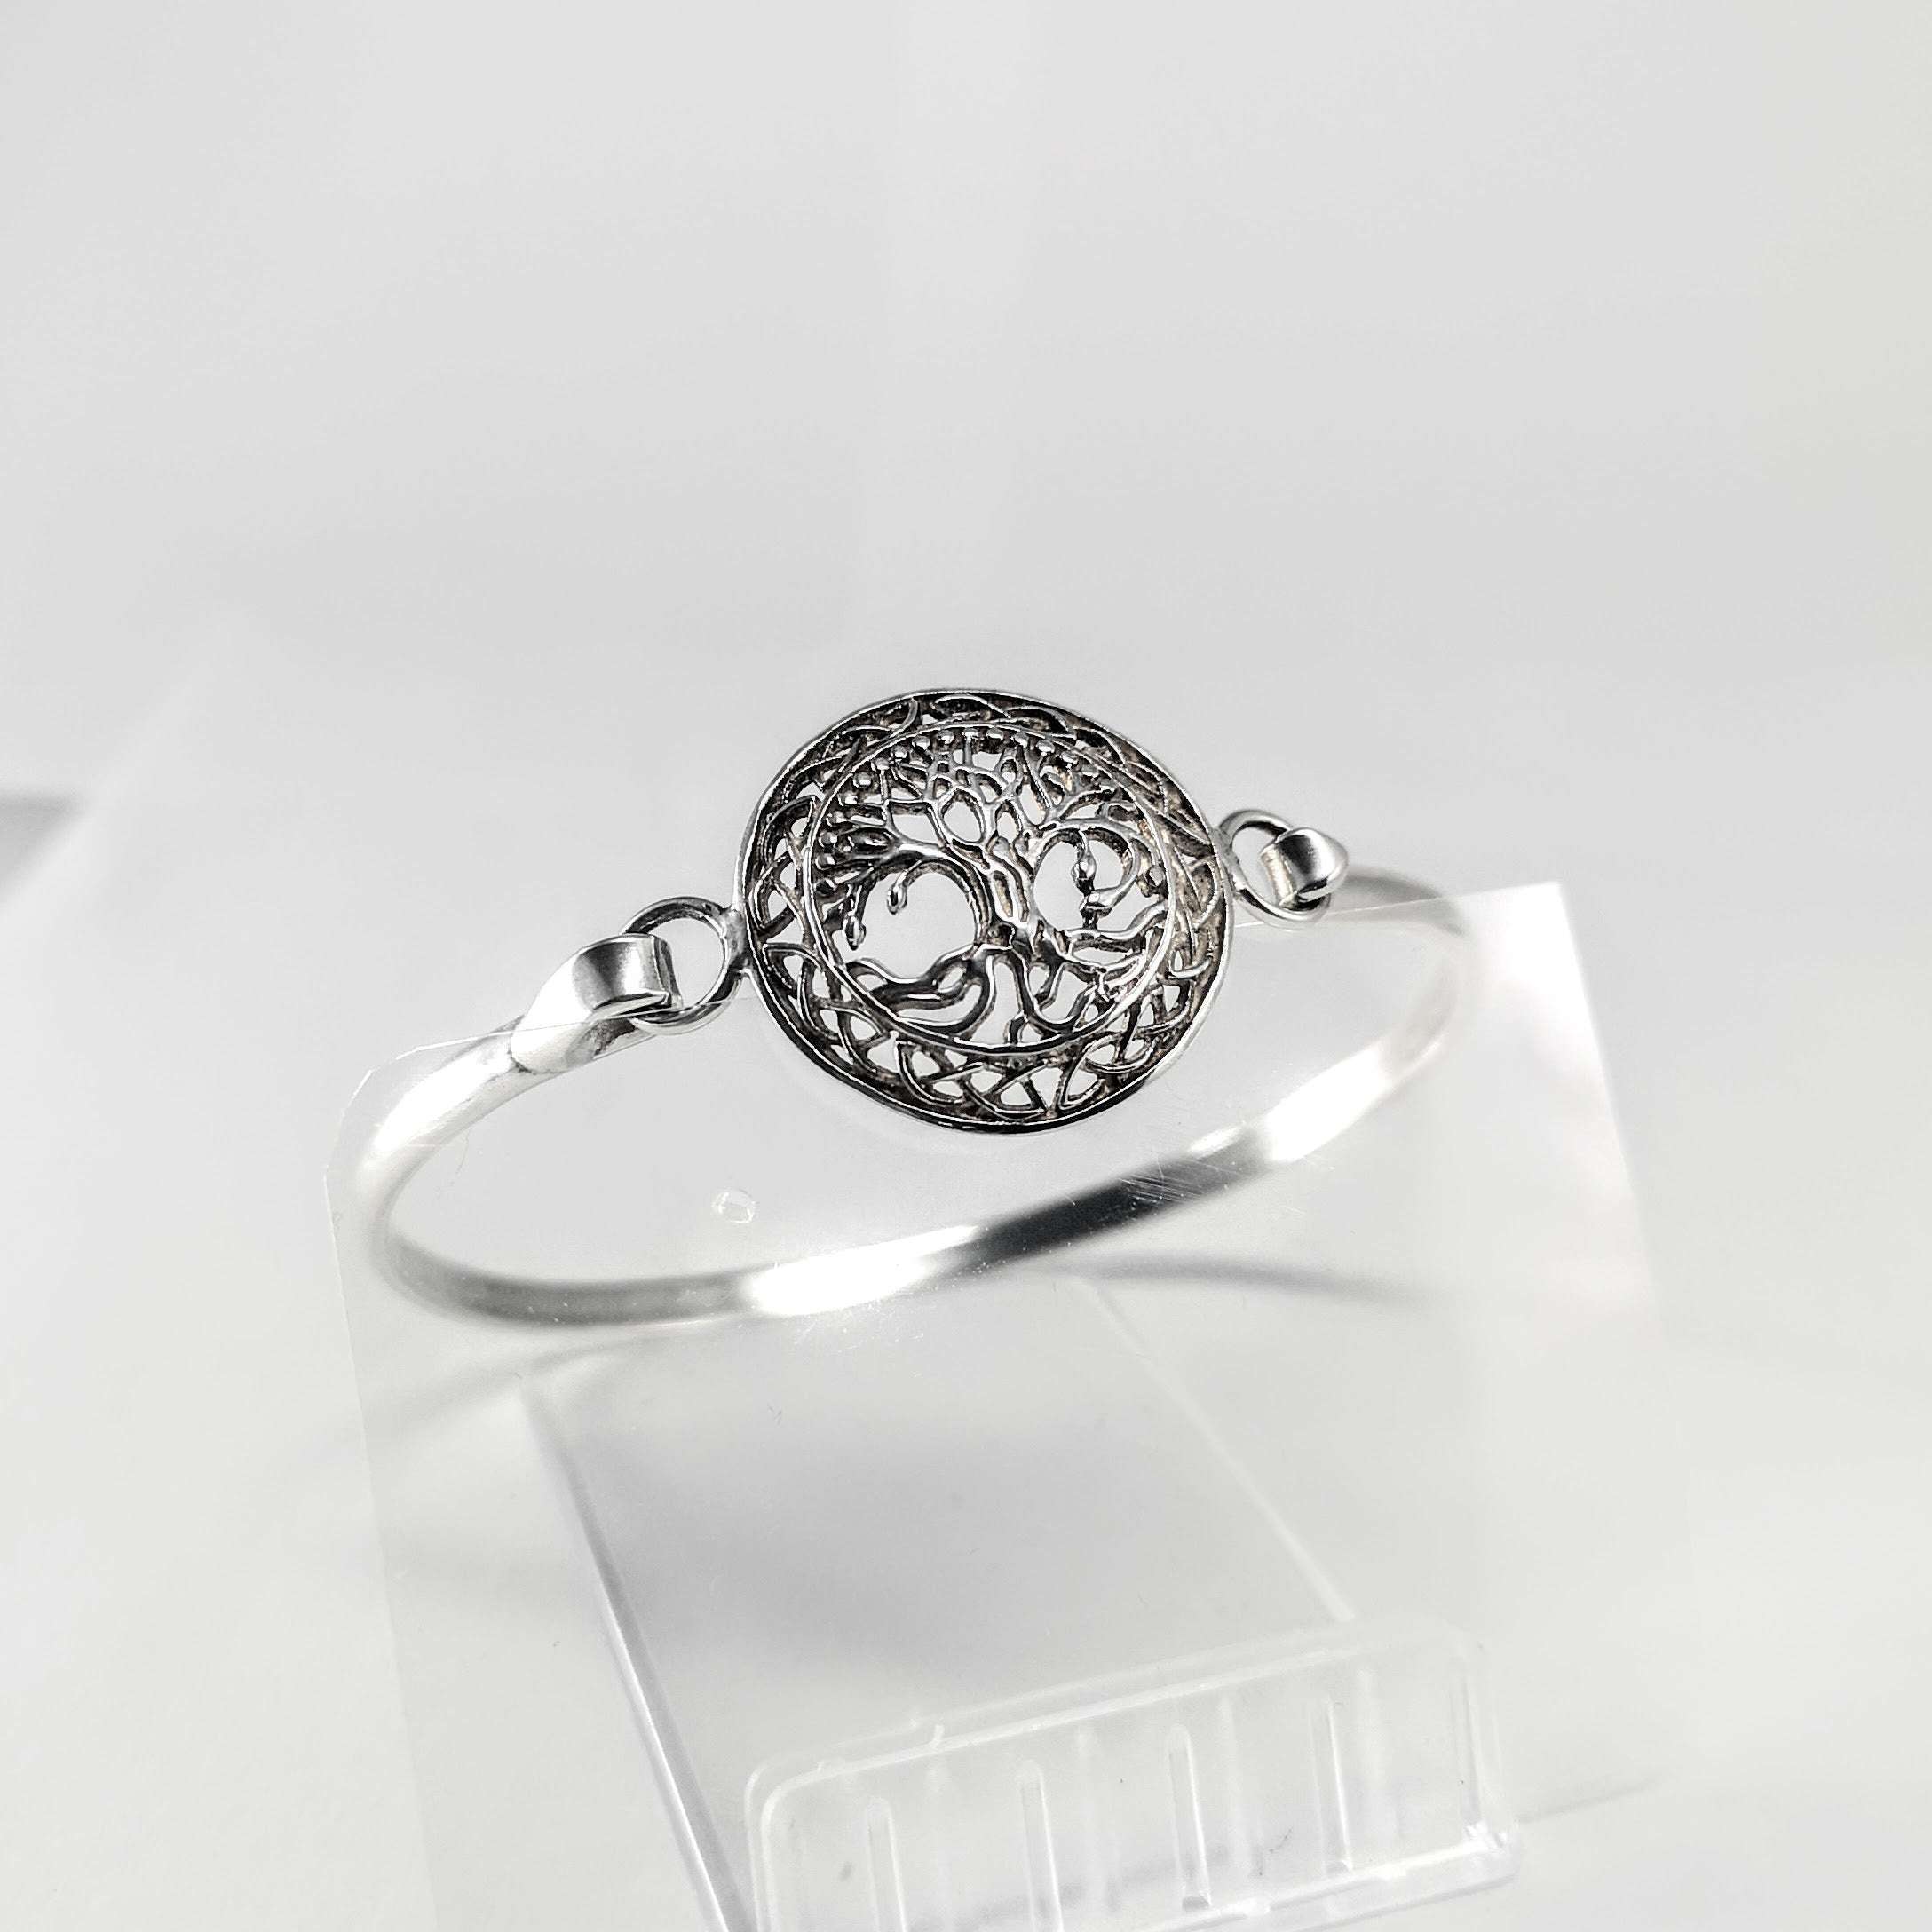 Tree of Life Sterling Silver Bangle with Celtic Weave Trim